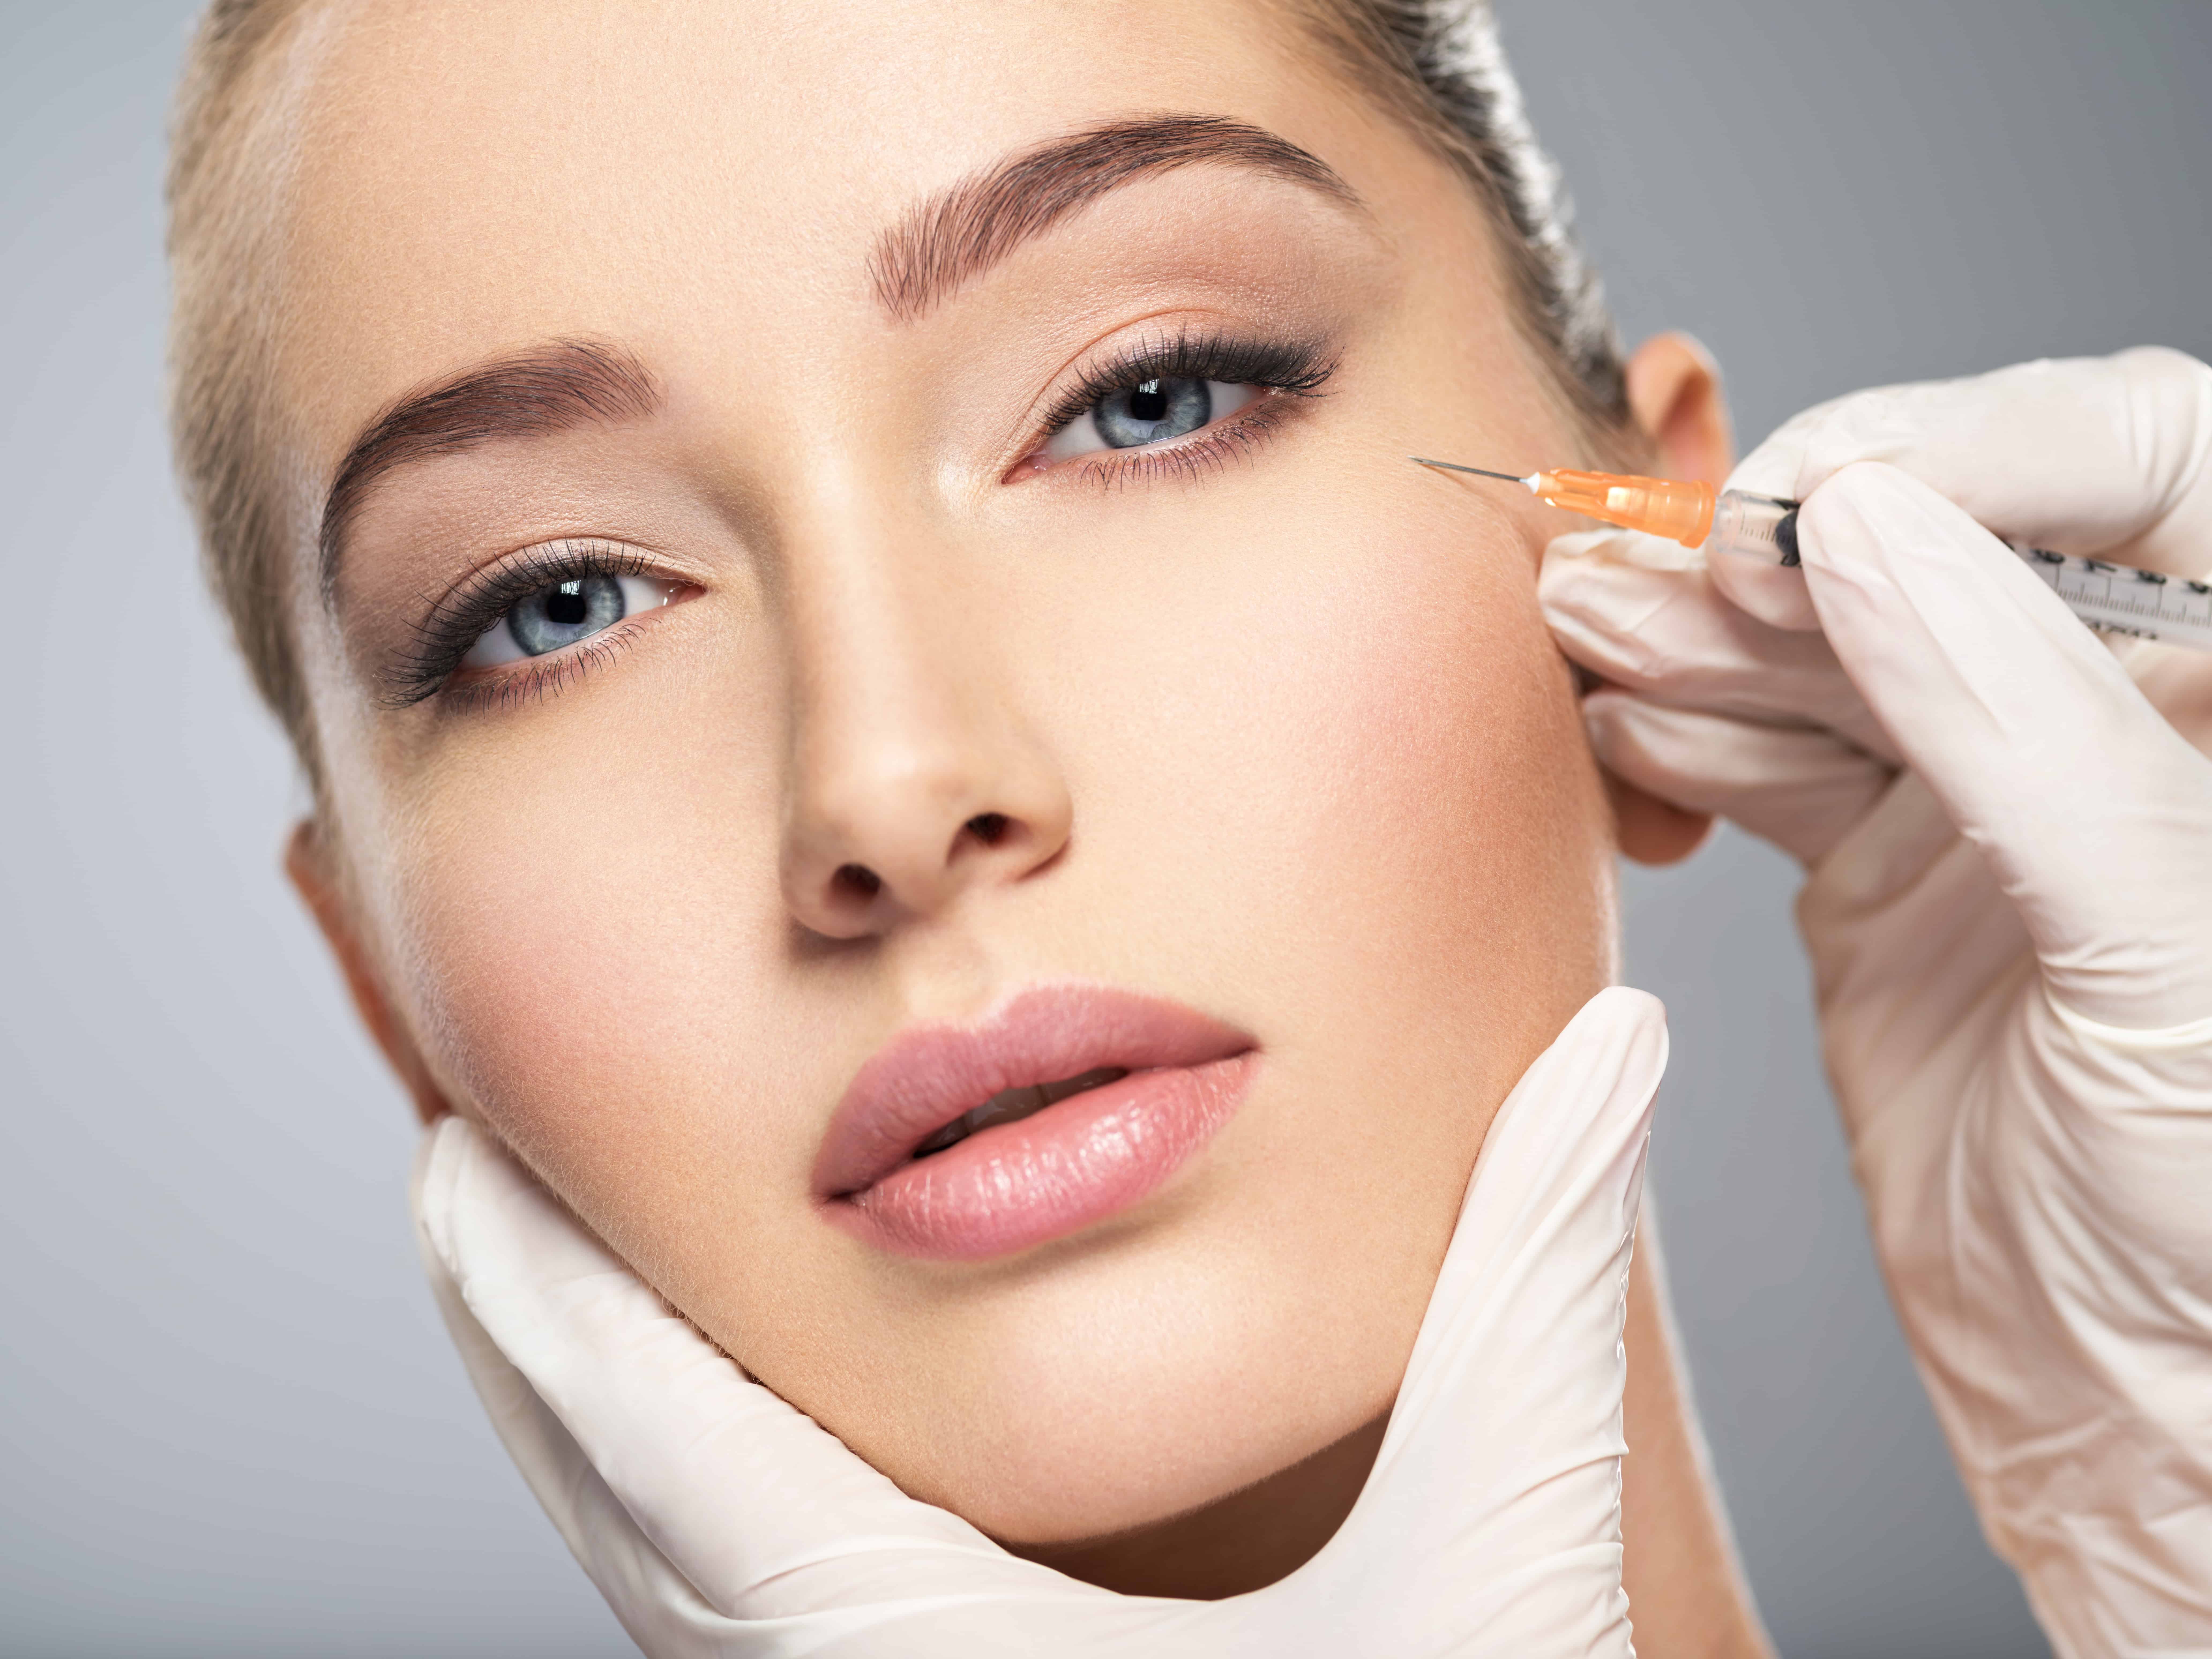 Botulinum Toxin (Botox) For Reducing The Appearance Of Facial Wrinkles